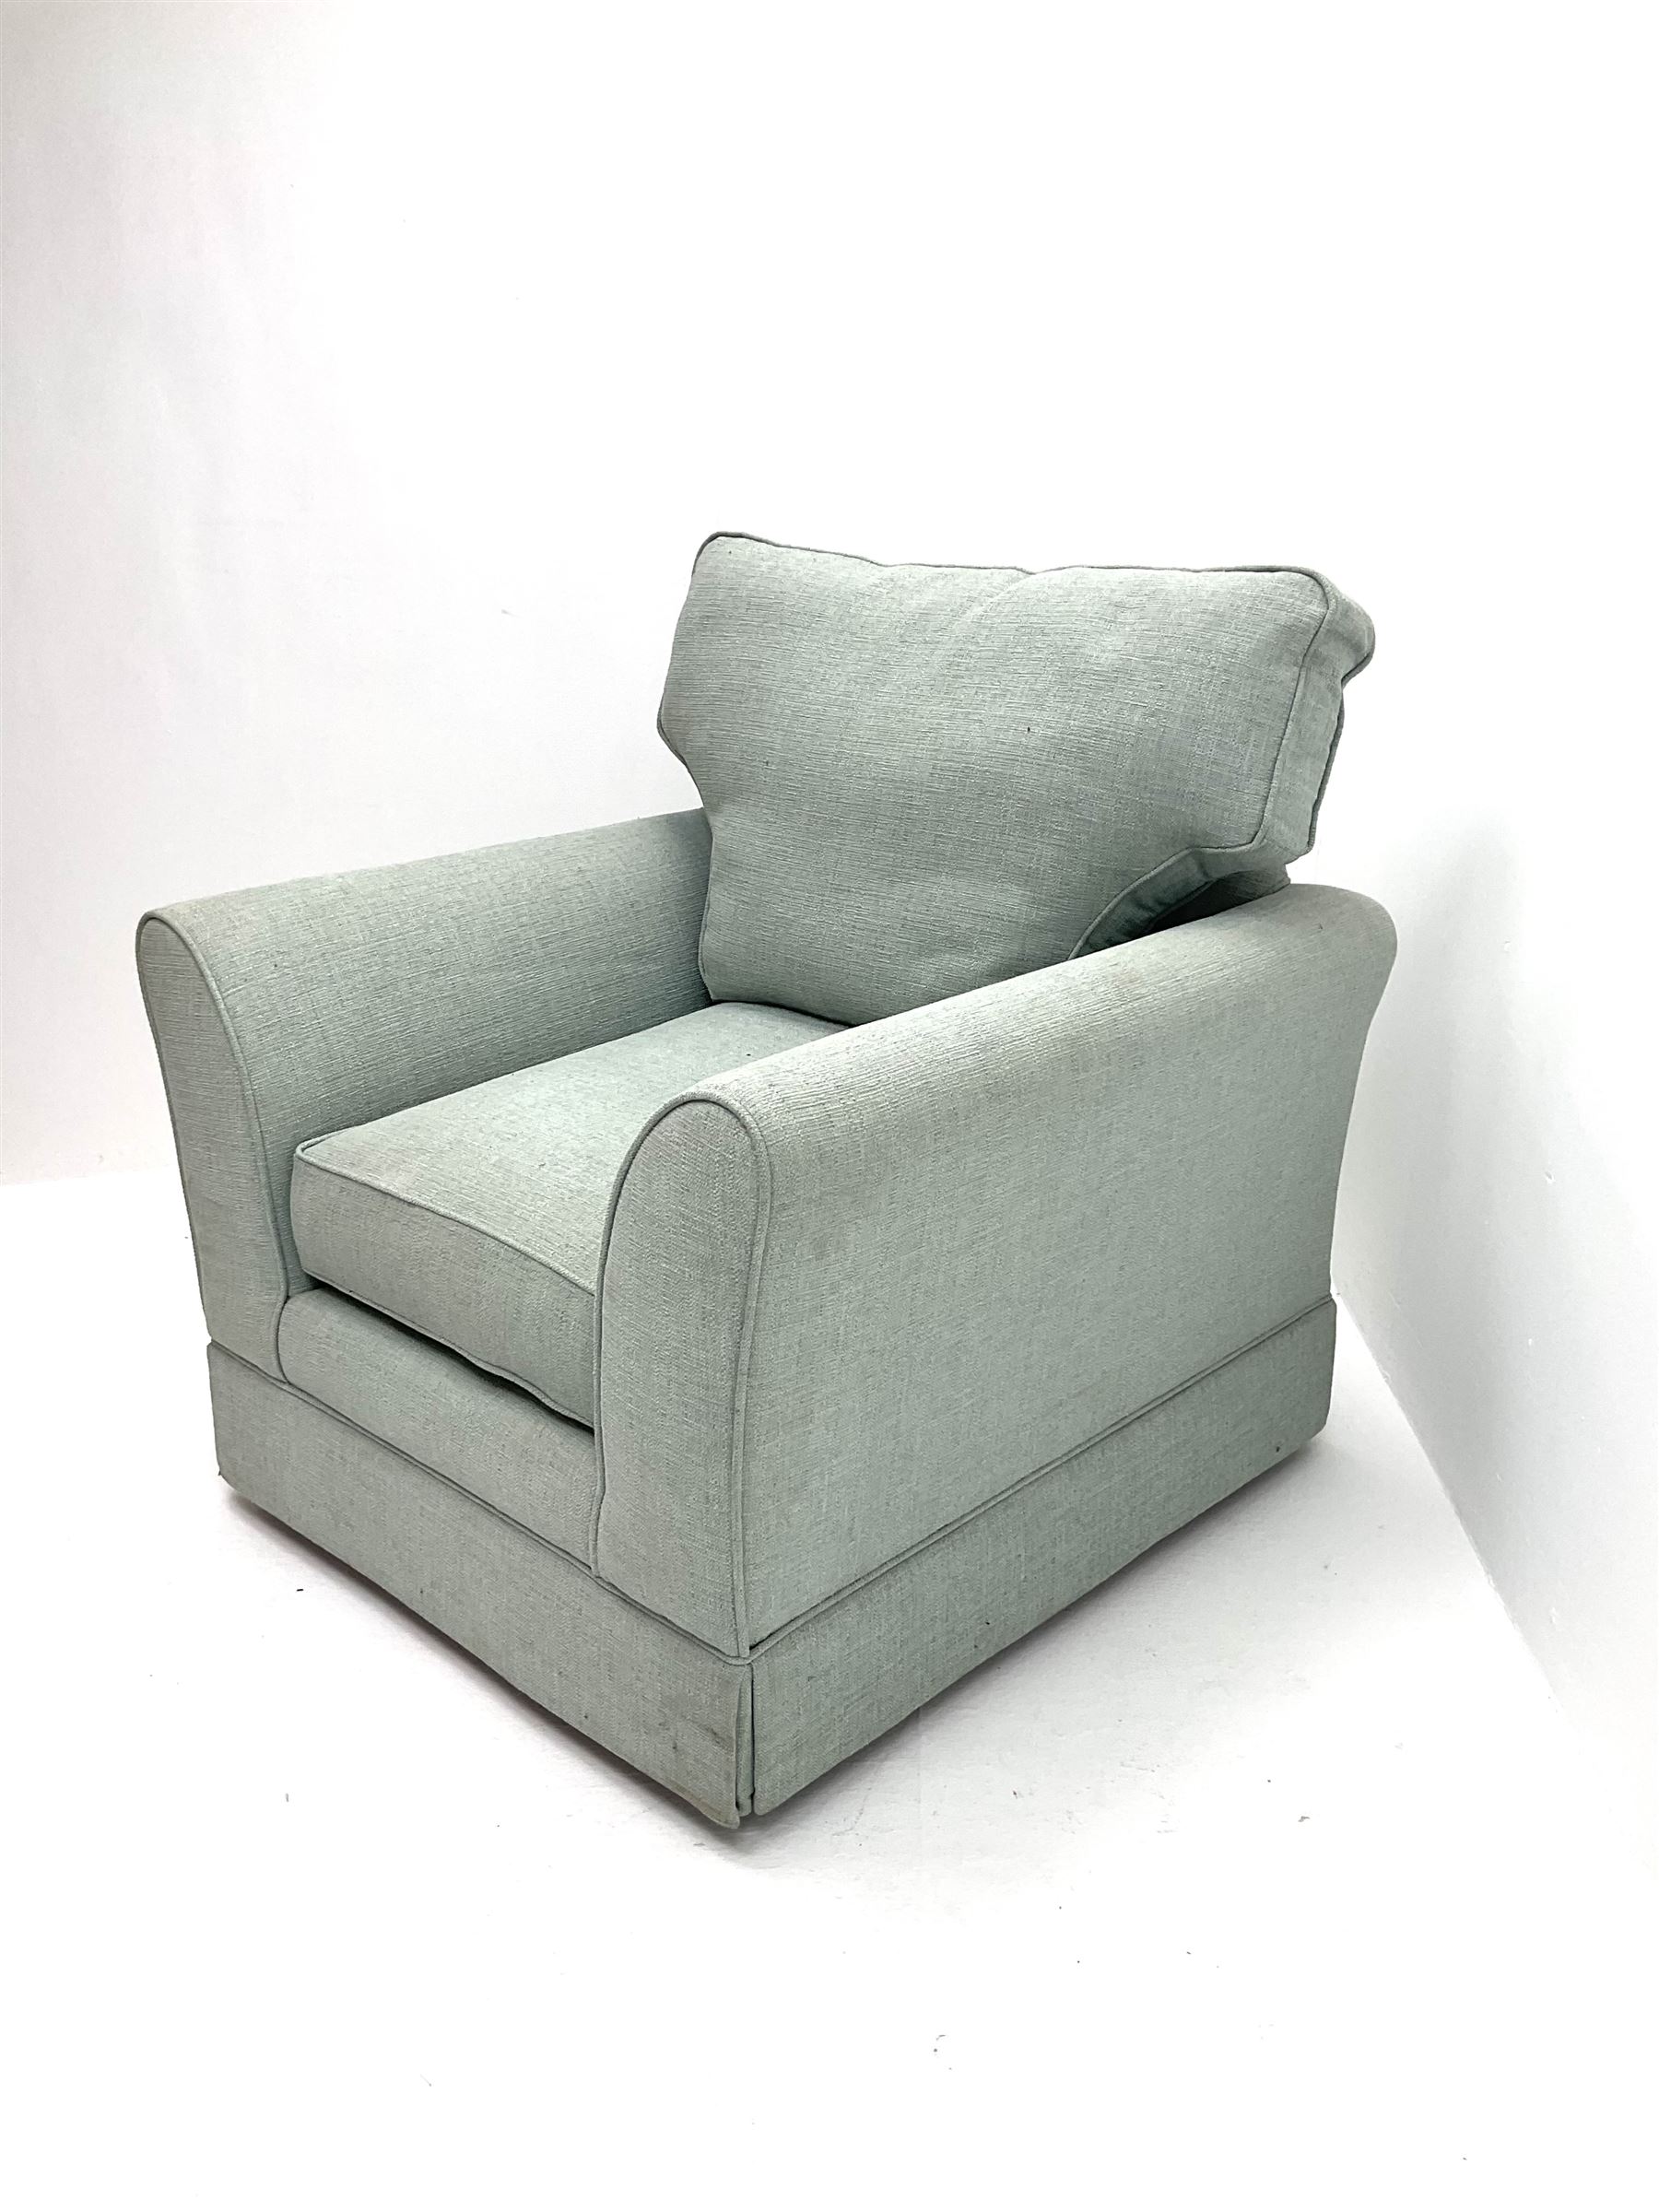 Traditional shaped armchair upholstered in duck egg blue fabric - Image 3 of 3